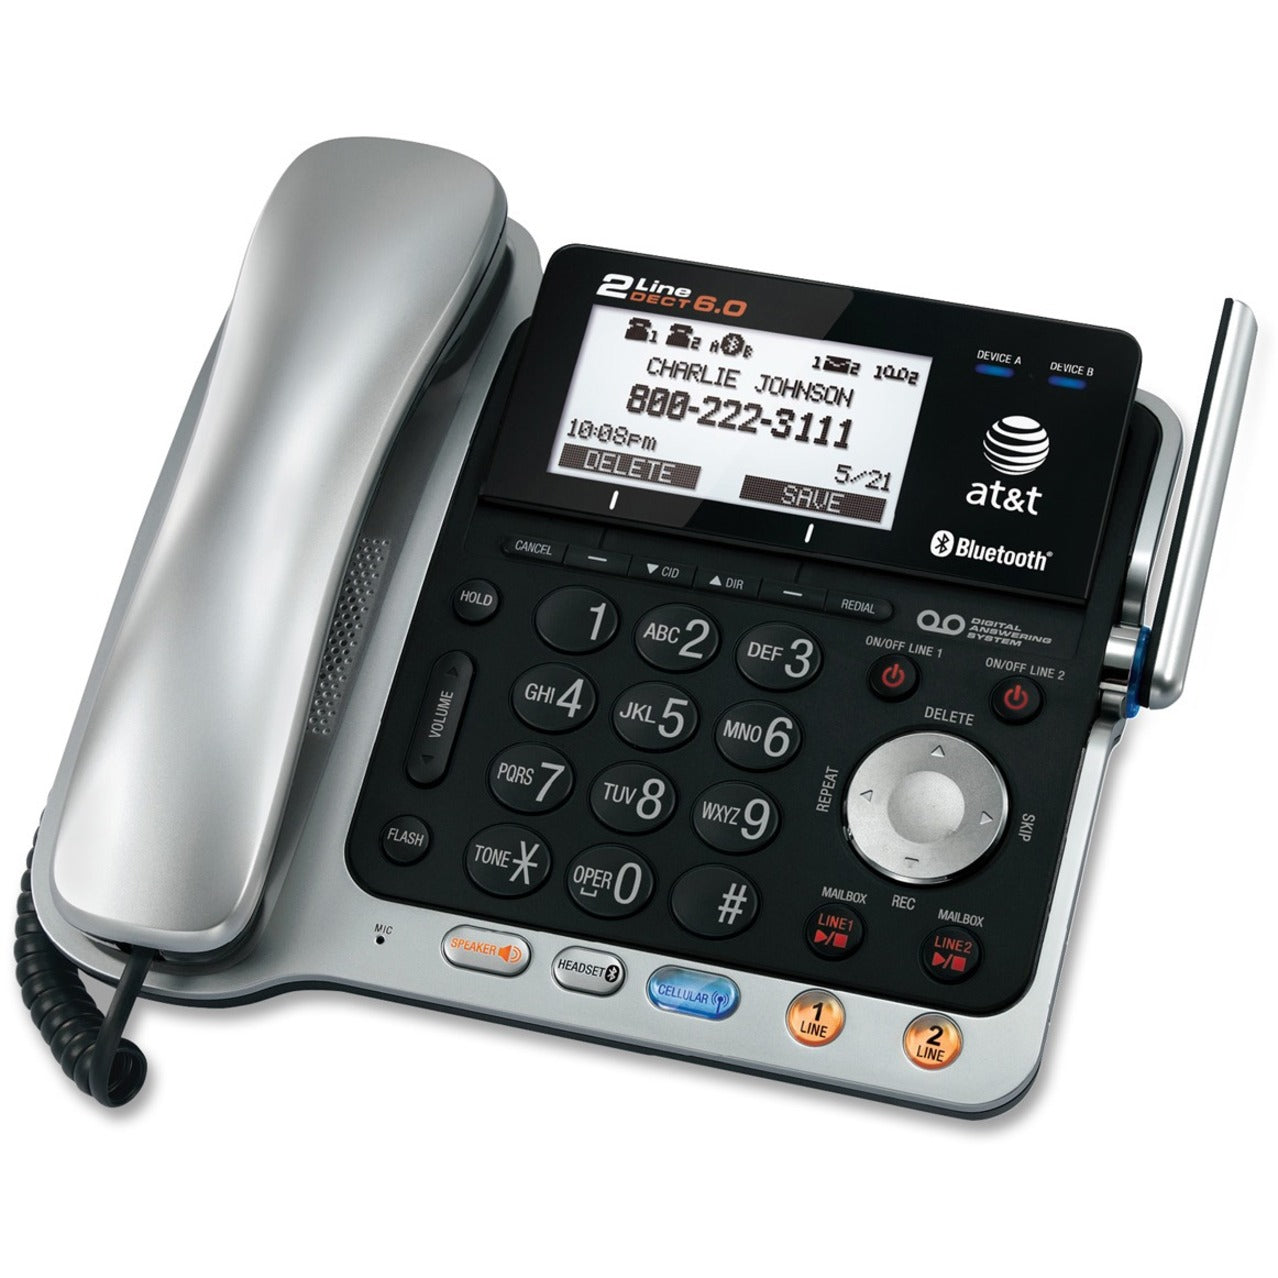 AT&T TL86109 Dect 6.0 2-line Telephone System with Handset, Bluetooth Cordless Phone - Black, Silver